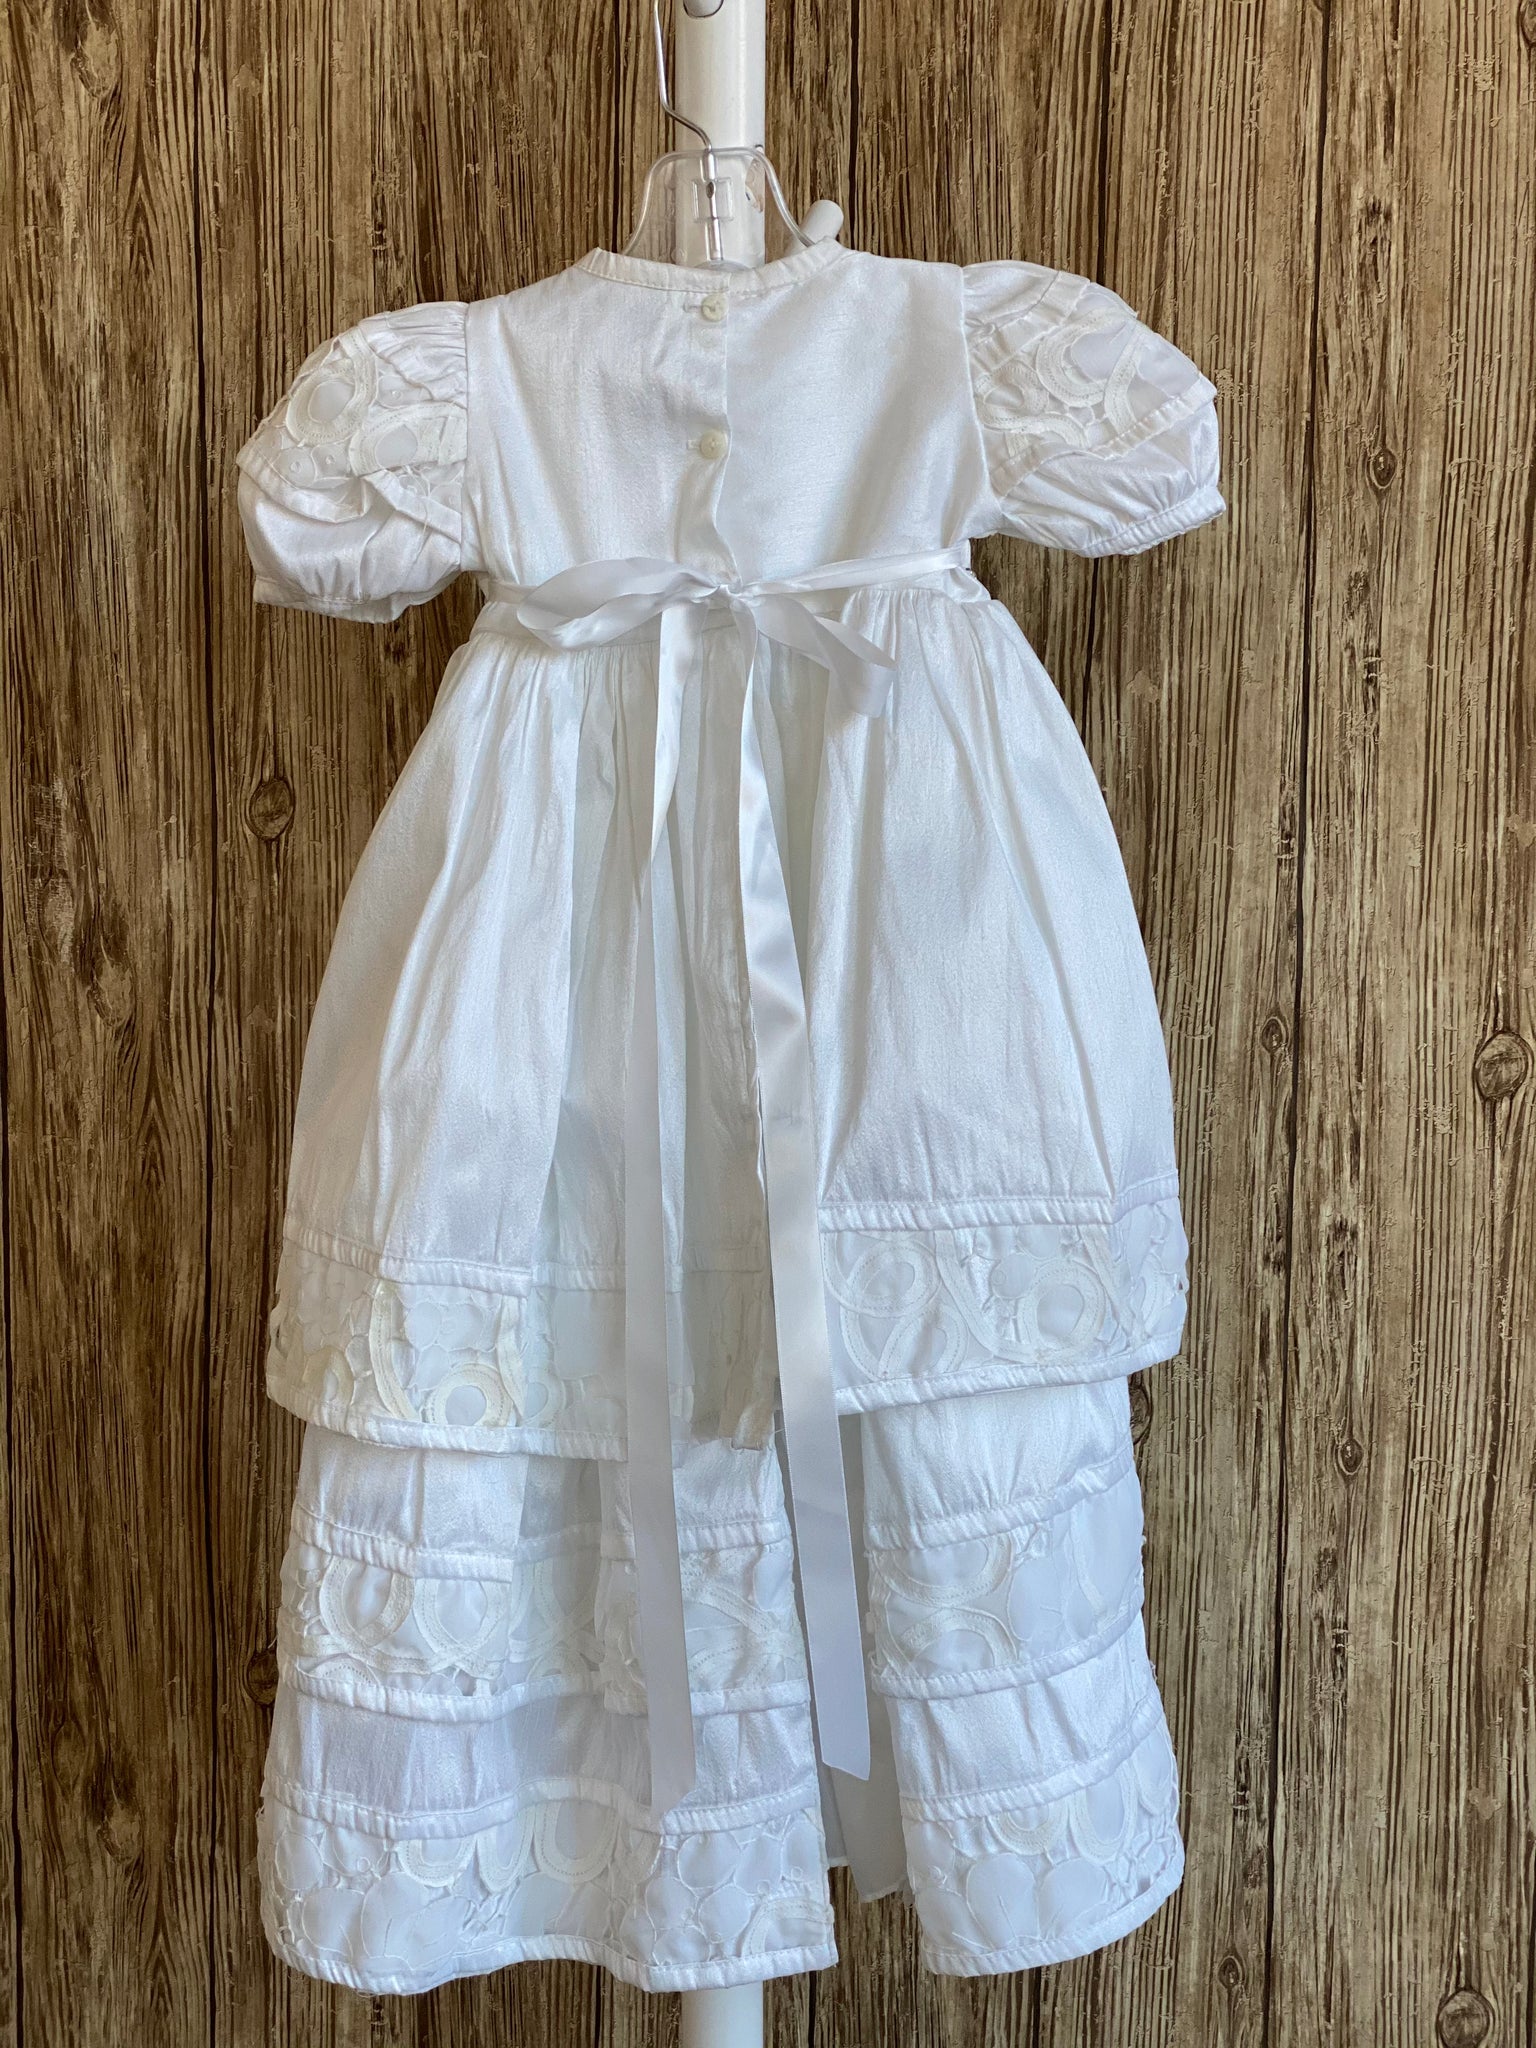 This a beautiful, one-of-a-kind baptism gown.  A lovely gown for a precious child.  White, size 12M Satin bodice Lace detailing along bodice and sleeves Rhinestones along bodice  Puffed sleeves Large flower  Satin skirting with lace detailing on edges  Select a beautiful headband to complete the outfit.  We have many to choose from.